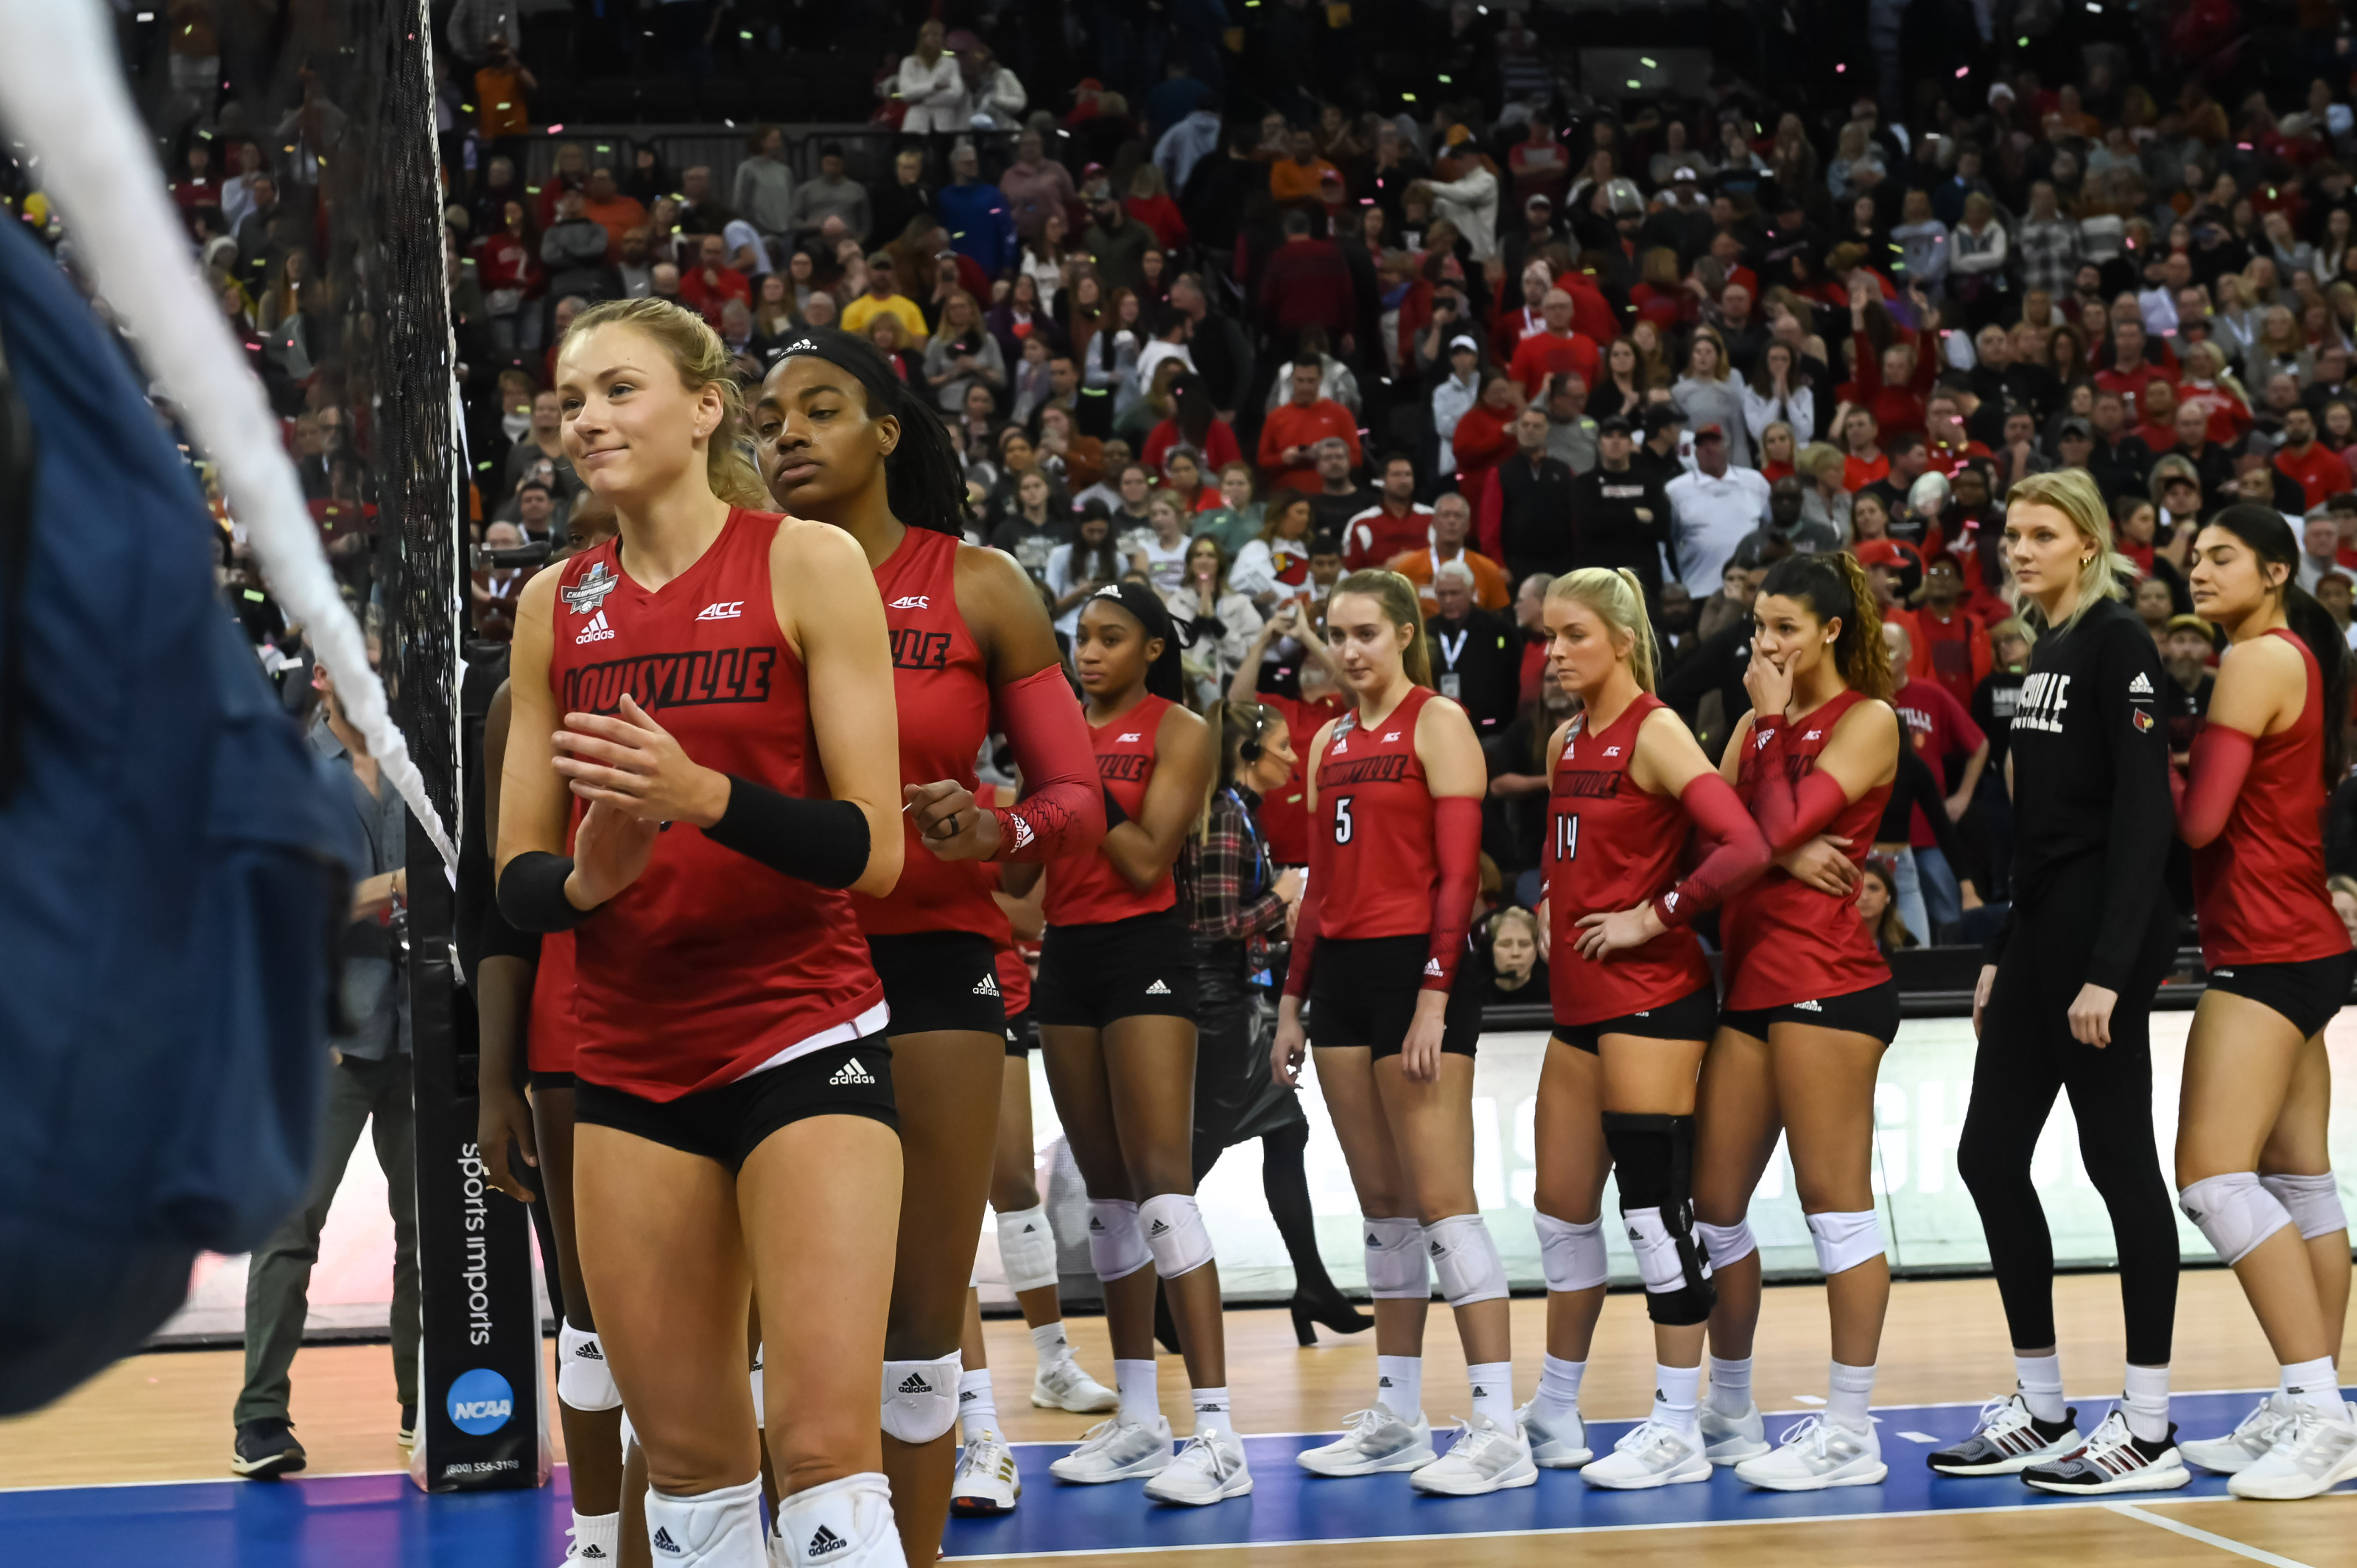 Louisville Cardinals 2022 NCAA Division I Women's Volleyball